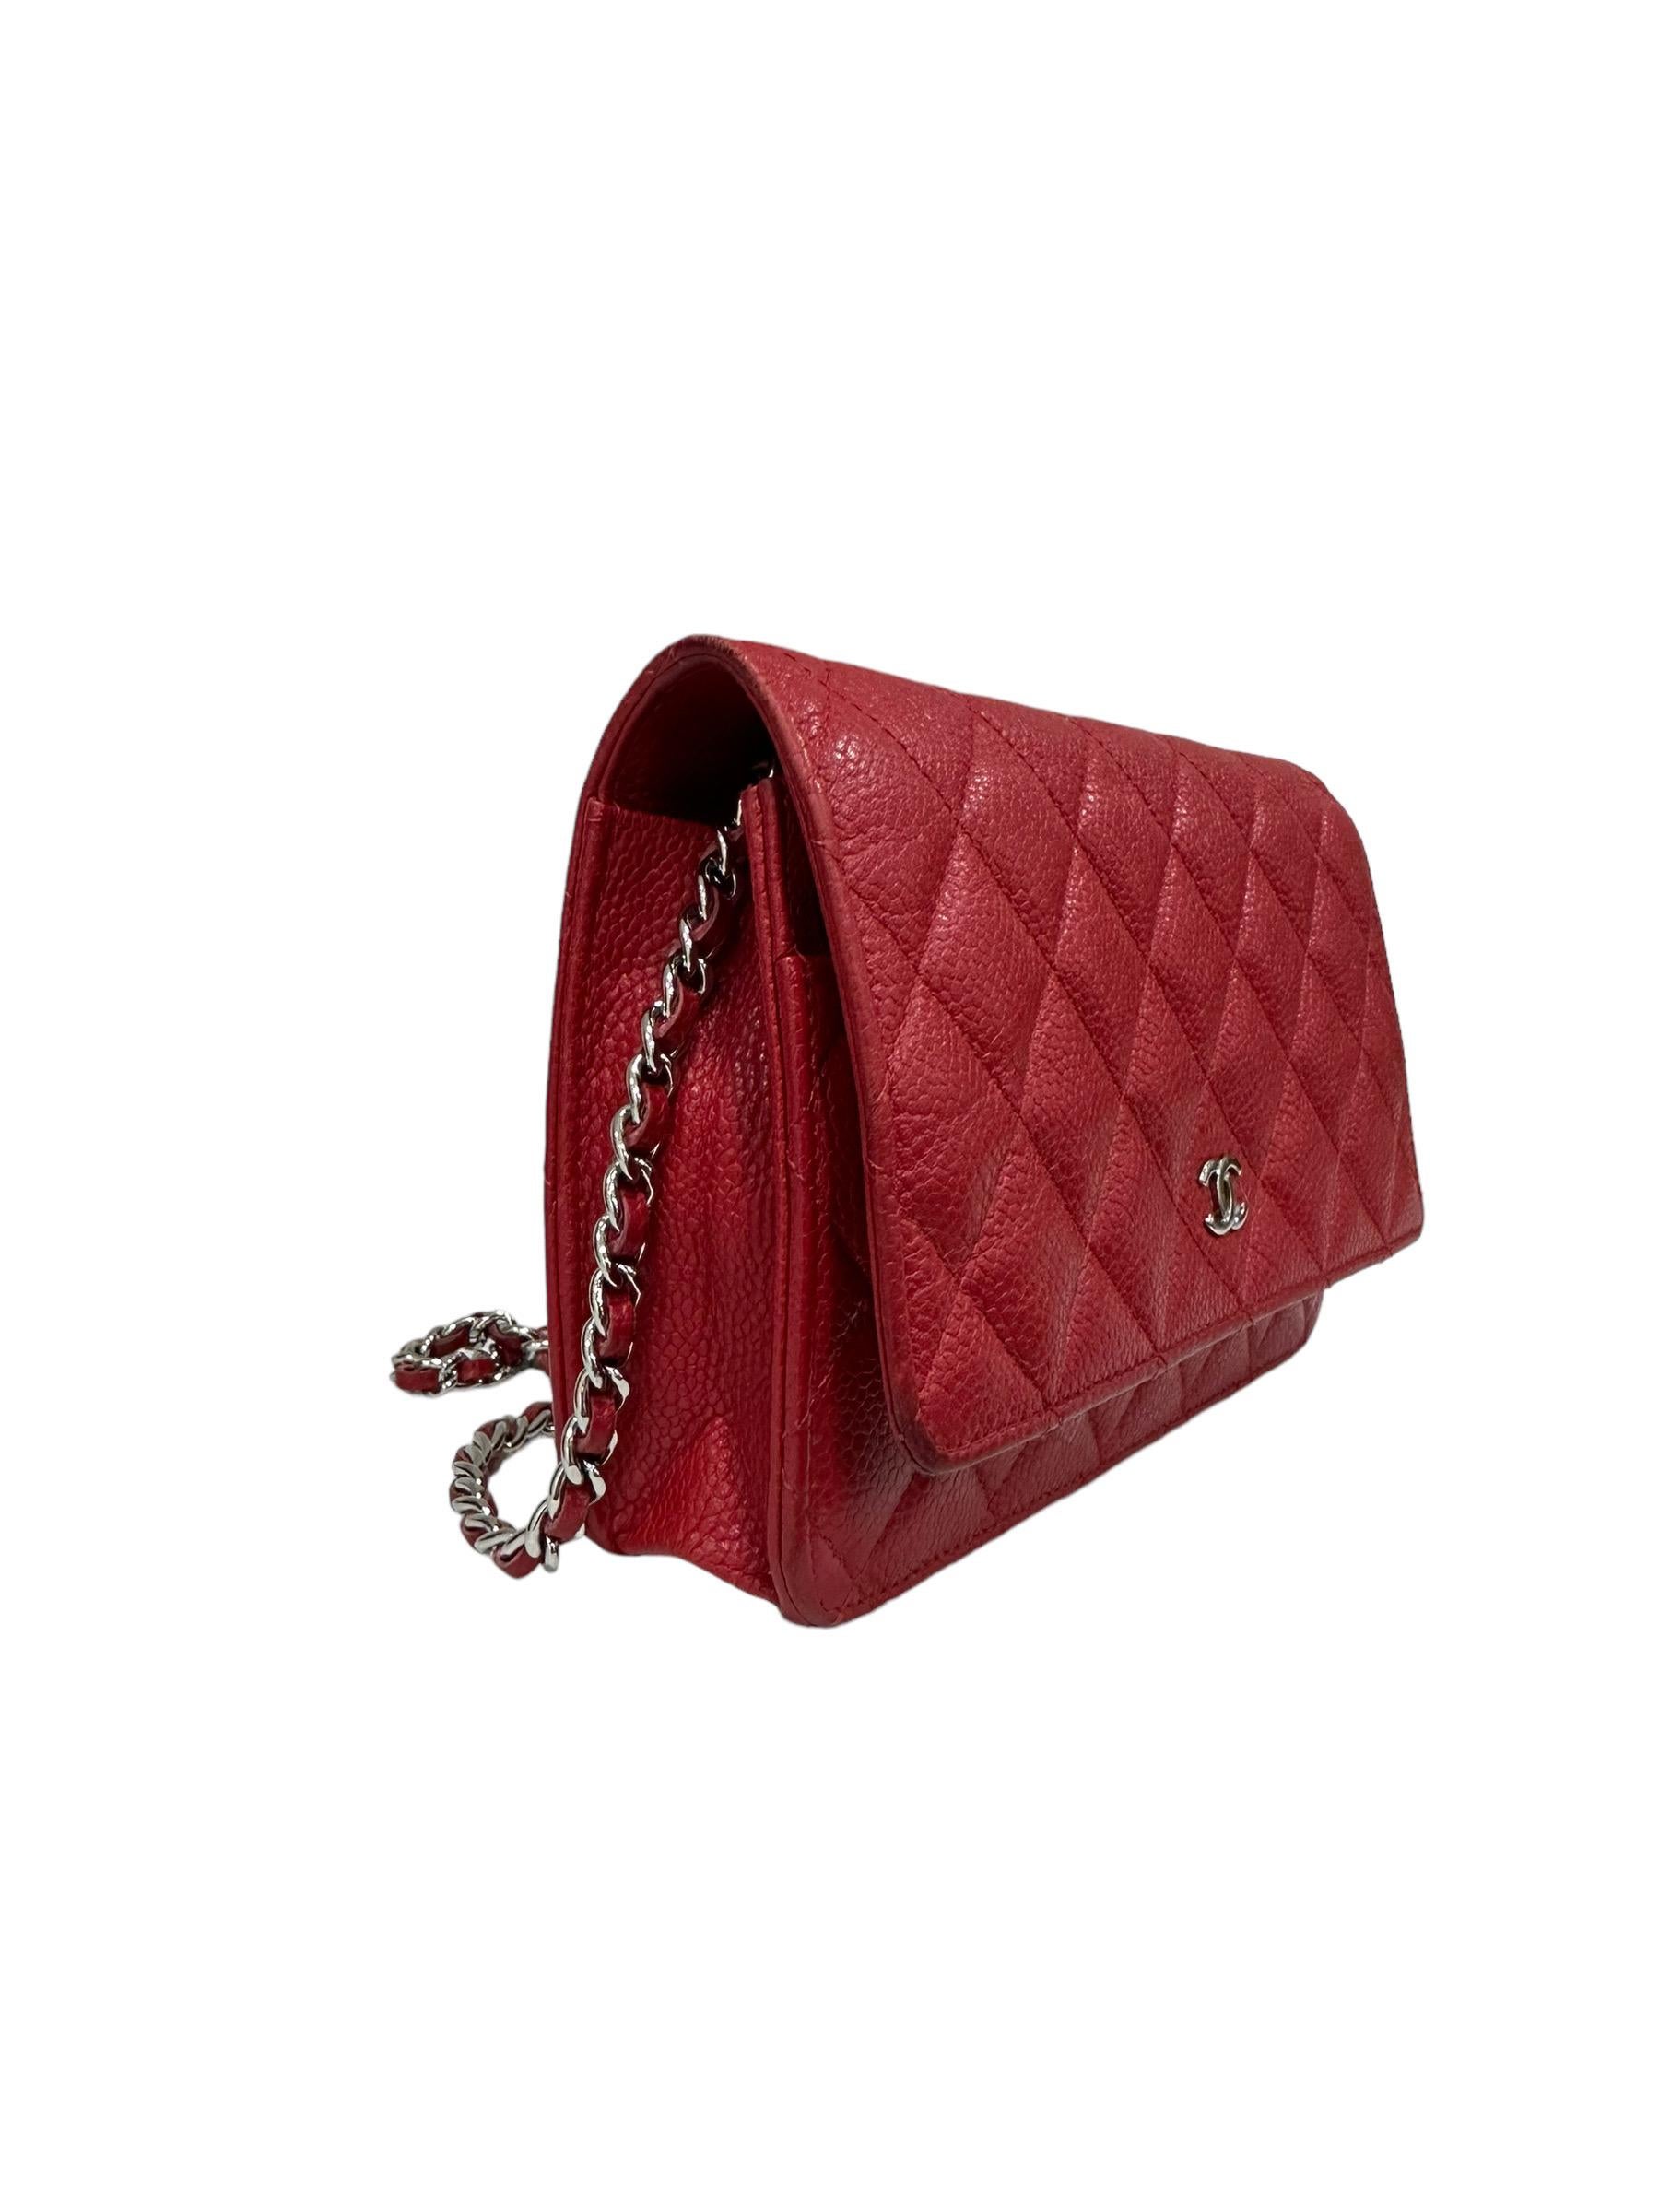 Chanel signed bag, Woc model, made in red caviar leather with silver hardware. Equipped with a flap with button closure, internally lined in red smooth leather, roomy for the essentials. Equipped with a leather and braided chain shoulder strap, and